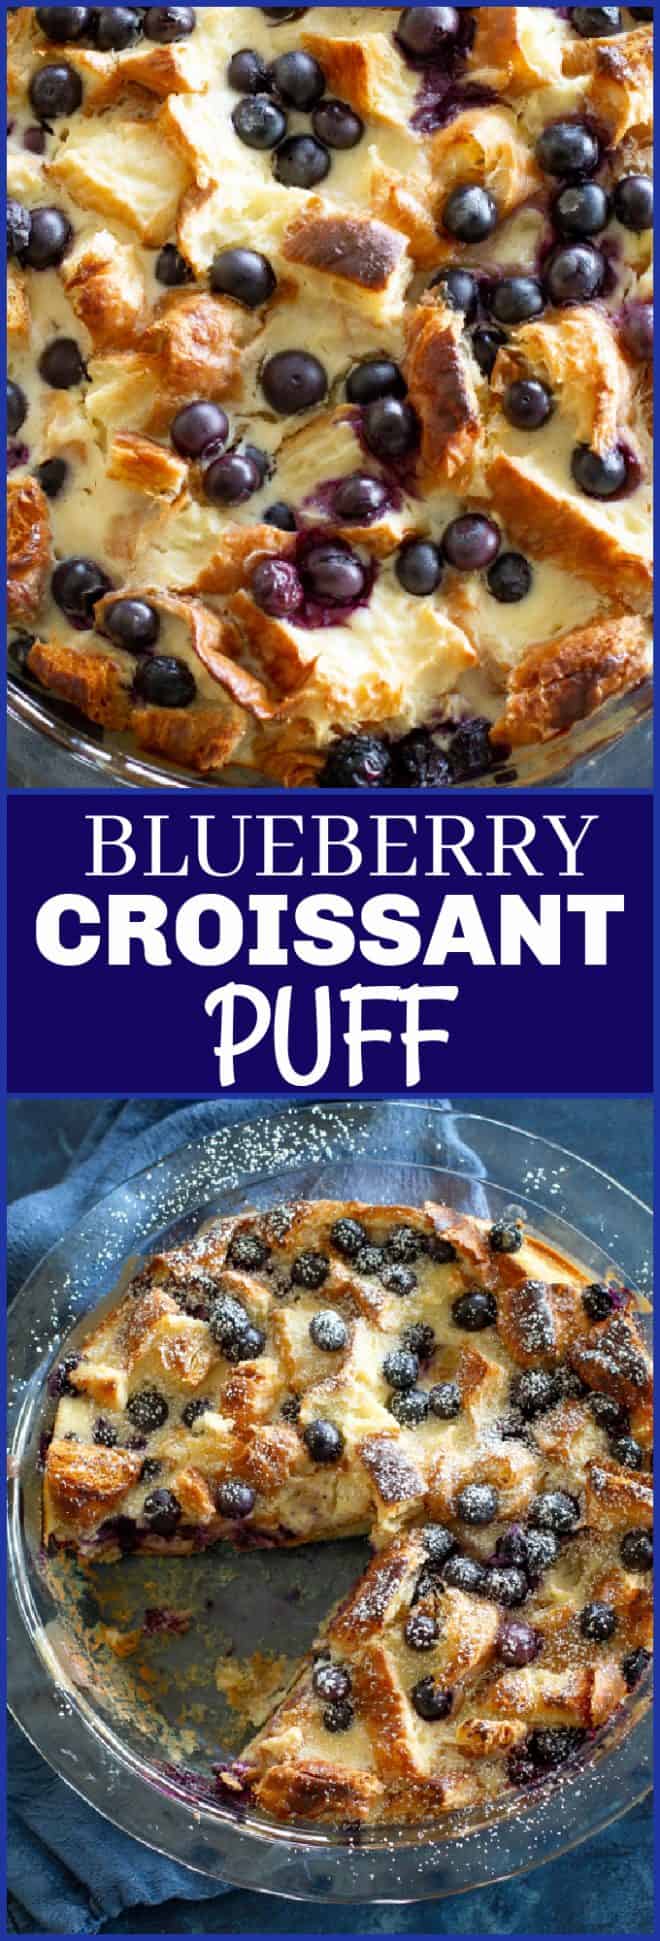 Blueberry Croissant Puff